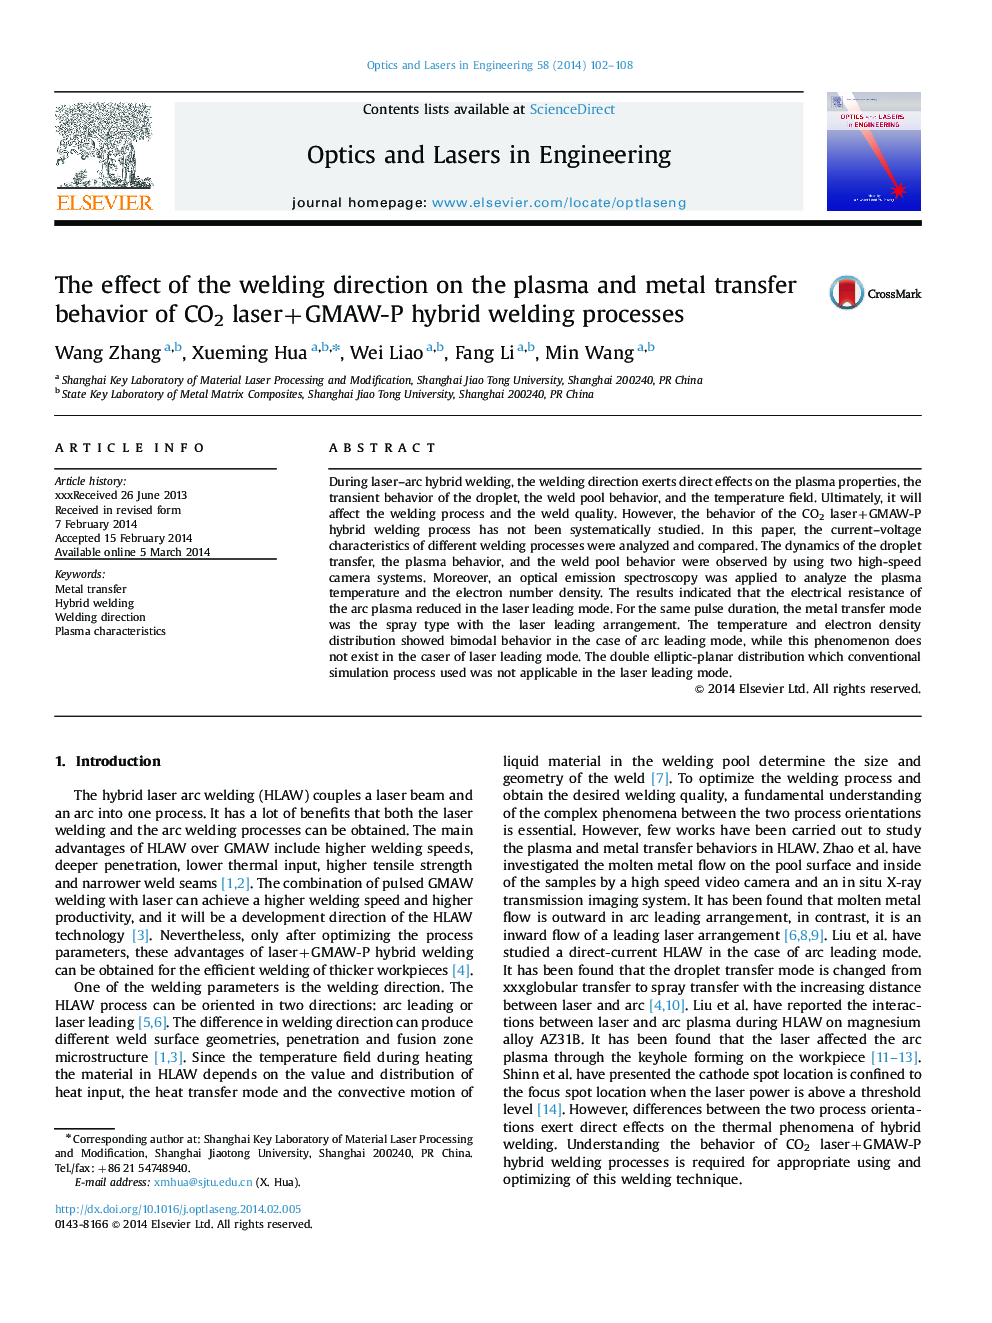 The effect of the welding direction on the plasma and metal transfer behavior of CO2 laser+GMAW-P hybrid welding processes